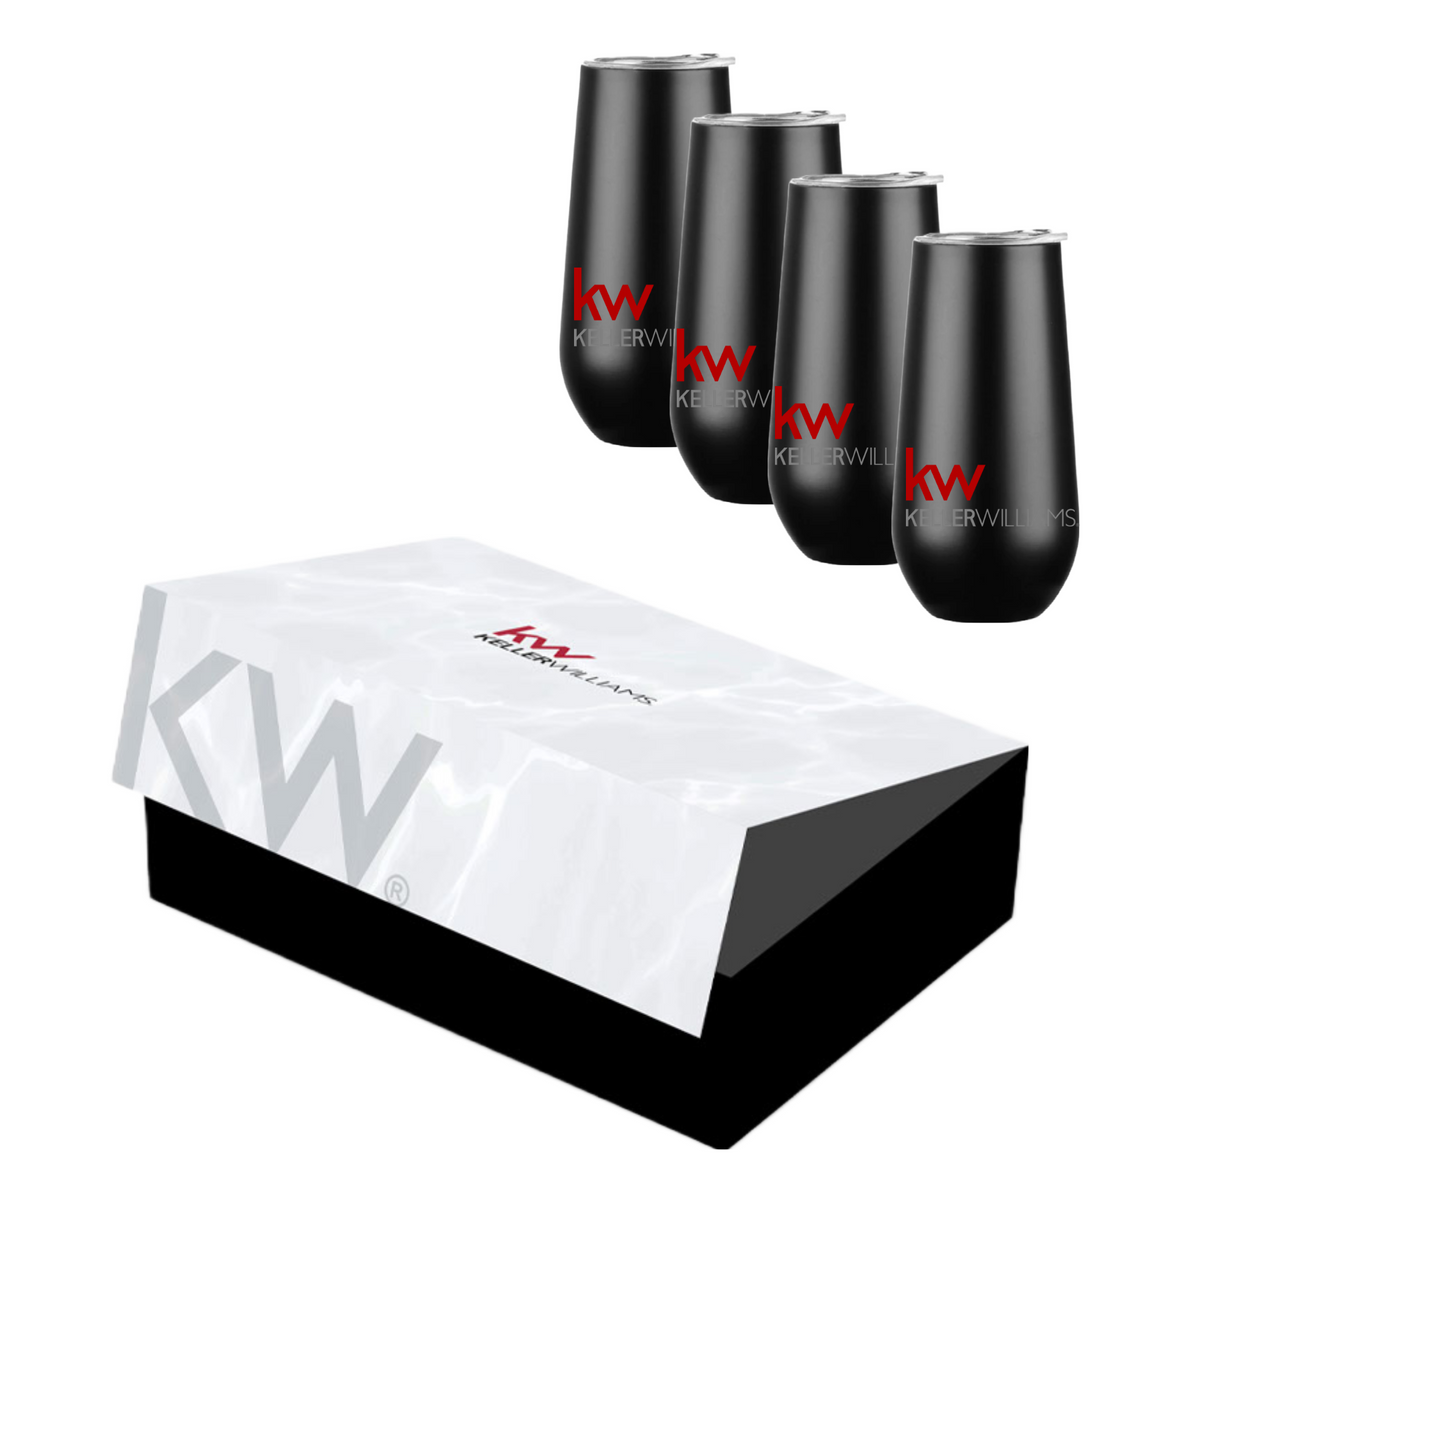 Set of 4 Keller Williams Wine tumblers in KW Closing Gift Box (from $$83 per complete box)